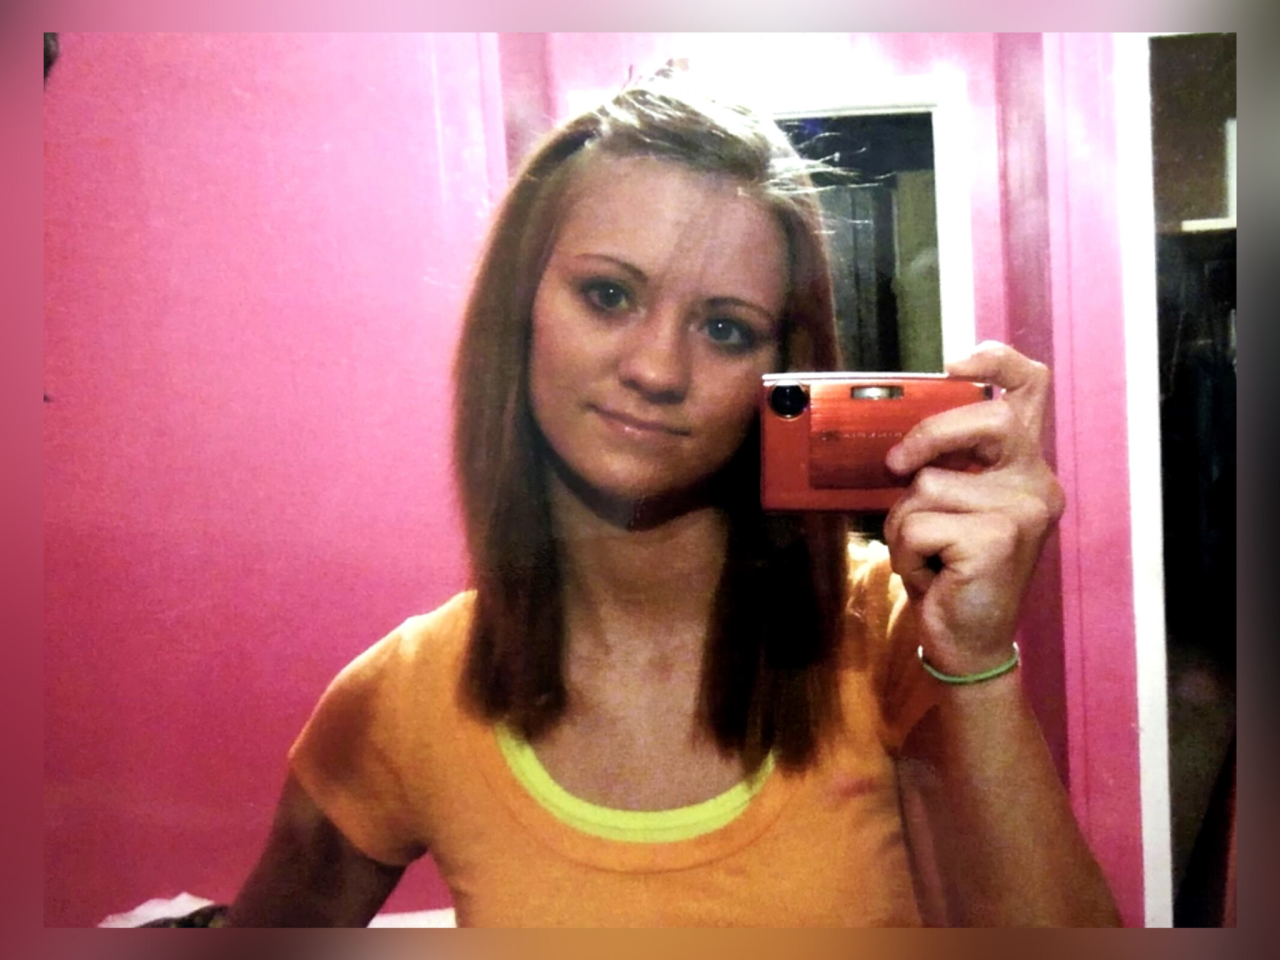 5 Key Facts About The Jessica Chambers Murder Case Murders and Homicides on Crimefeed Investigation Discovery photo photo